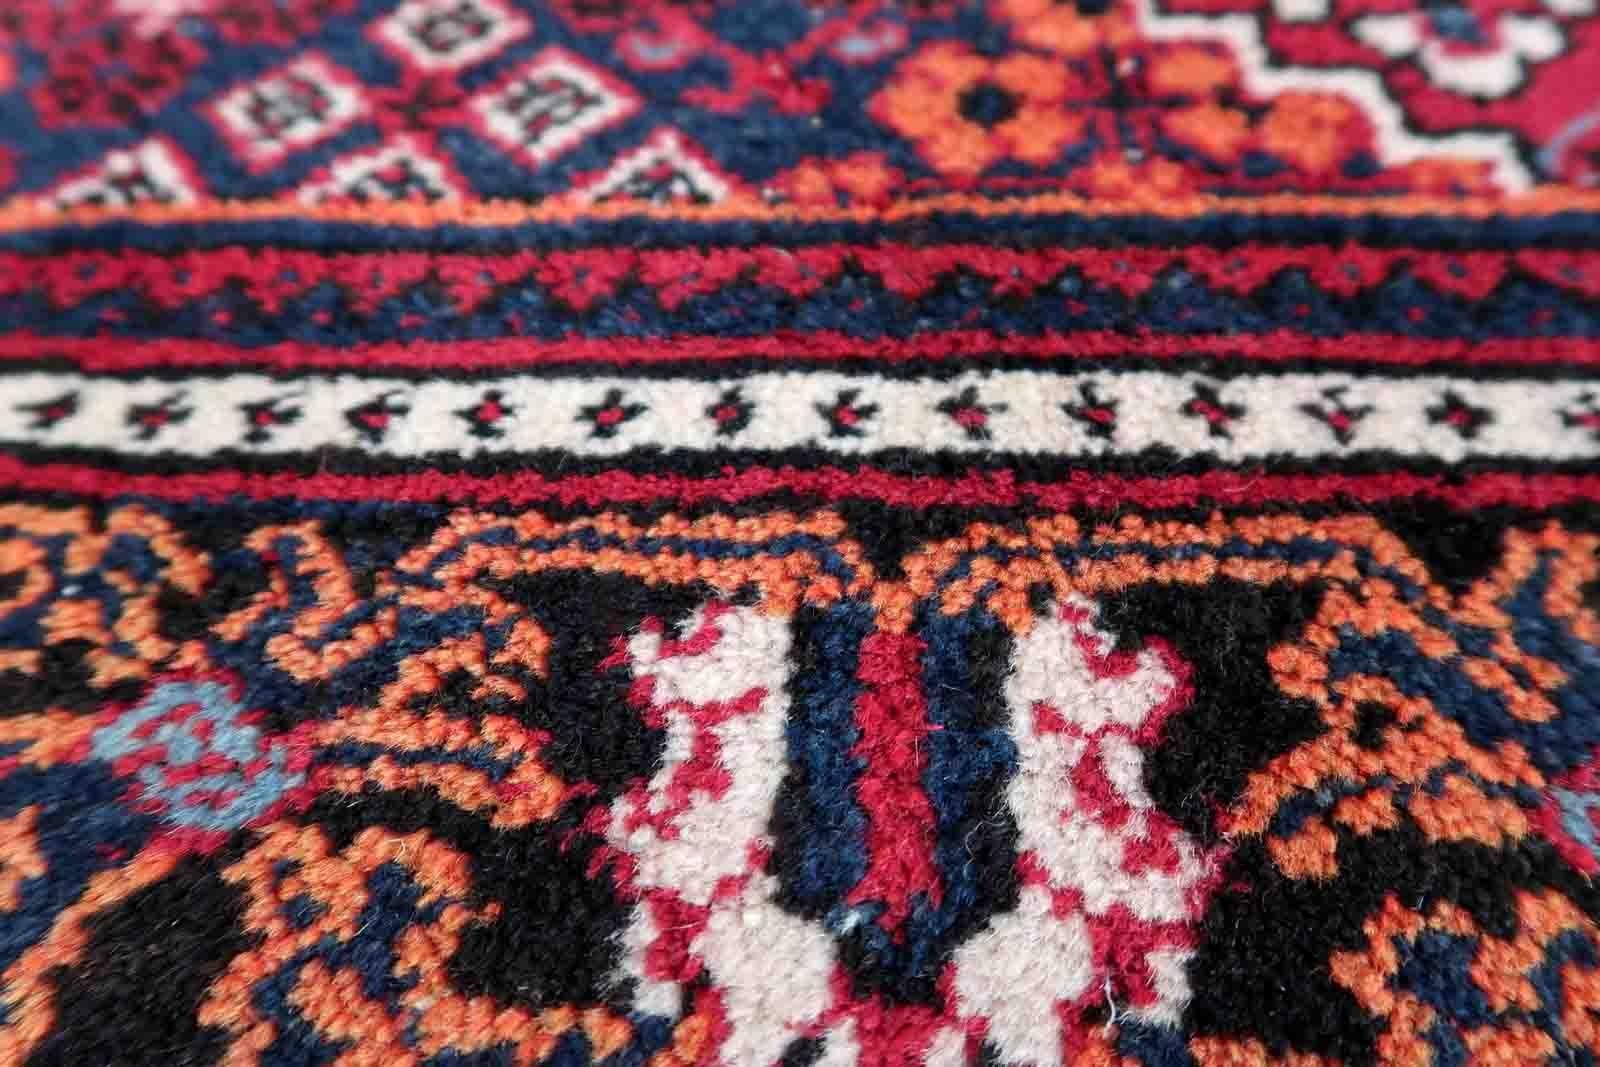 Handmade vintage Persian Hamadan rug in traditional design. The rug is from the end of 20th century, it is in original good condition. 

-condition: original good,

-circa: 1970s,

-size: 4.4' x 6.7' (136cm x 205cm),

-material: